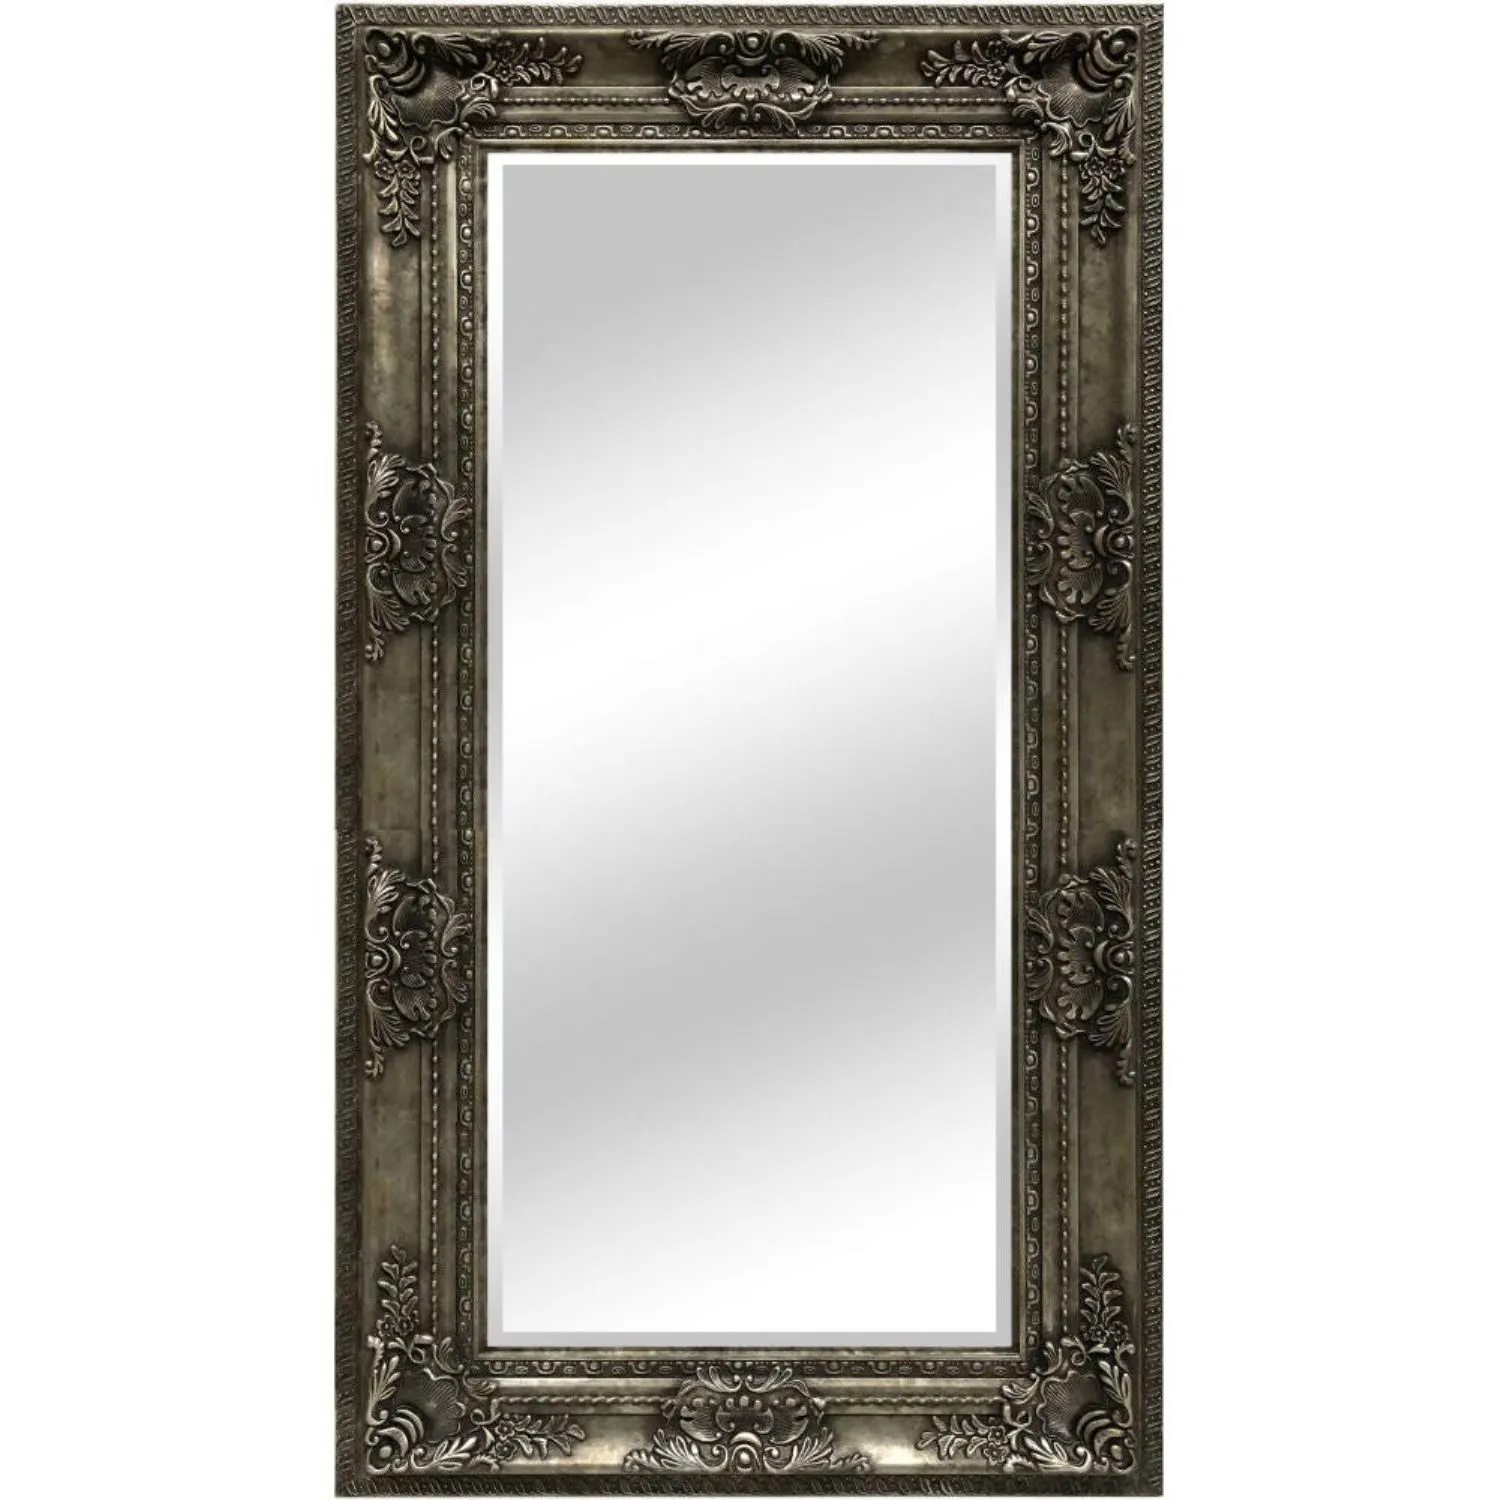 Mirror Collection Wooden Framed Leaner Mirror